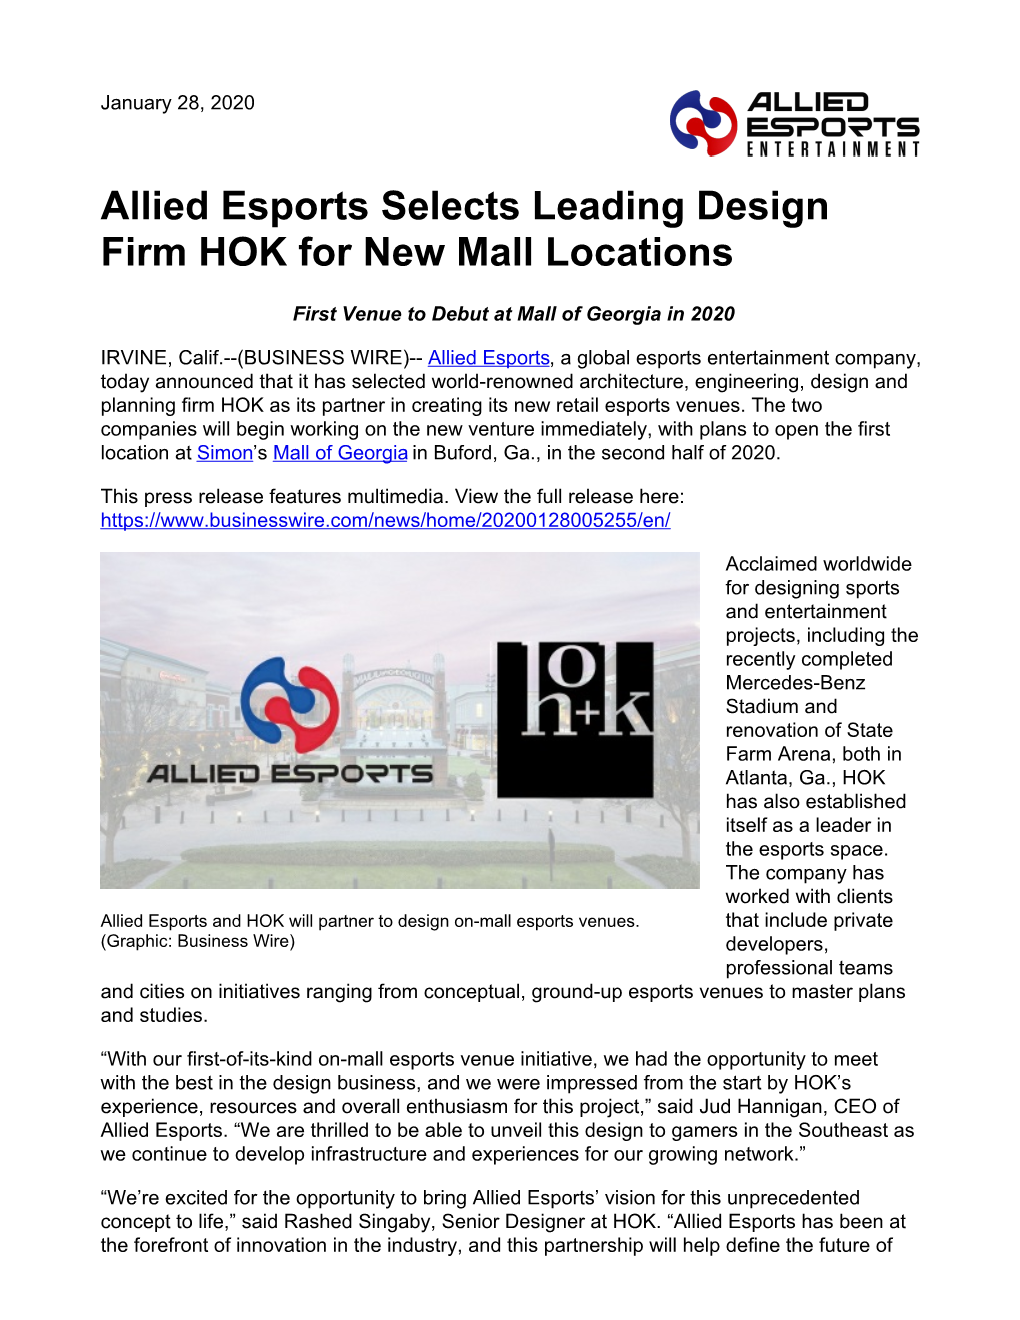 Allied Esports Selects Leading Design Firm HOK for New Mall Locations